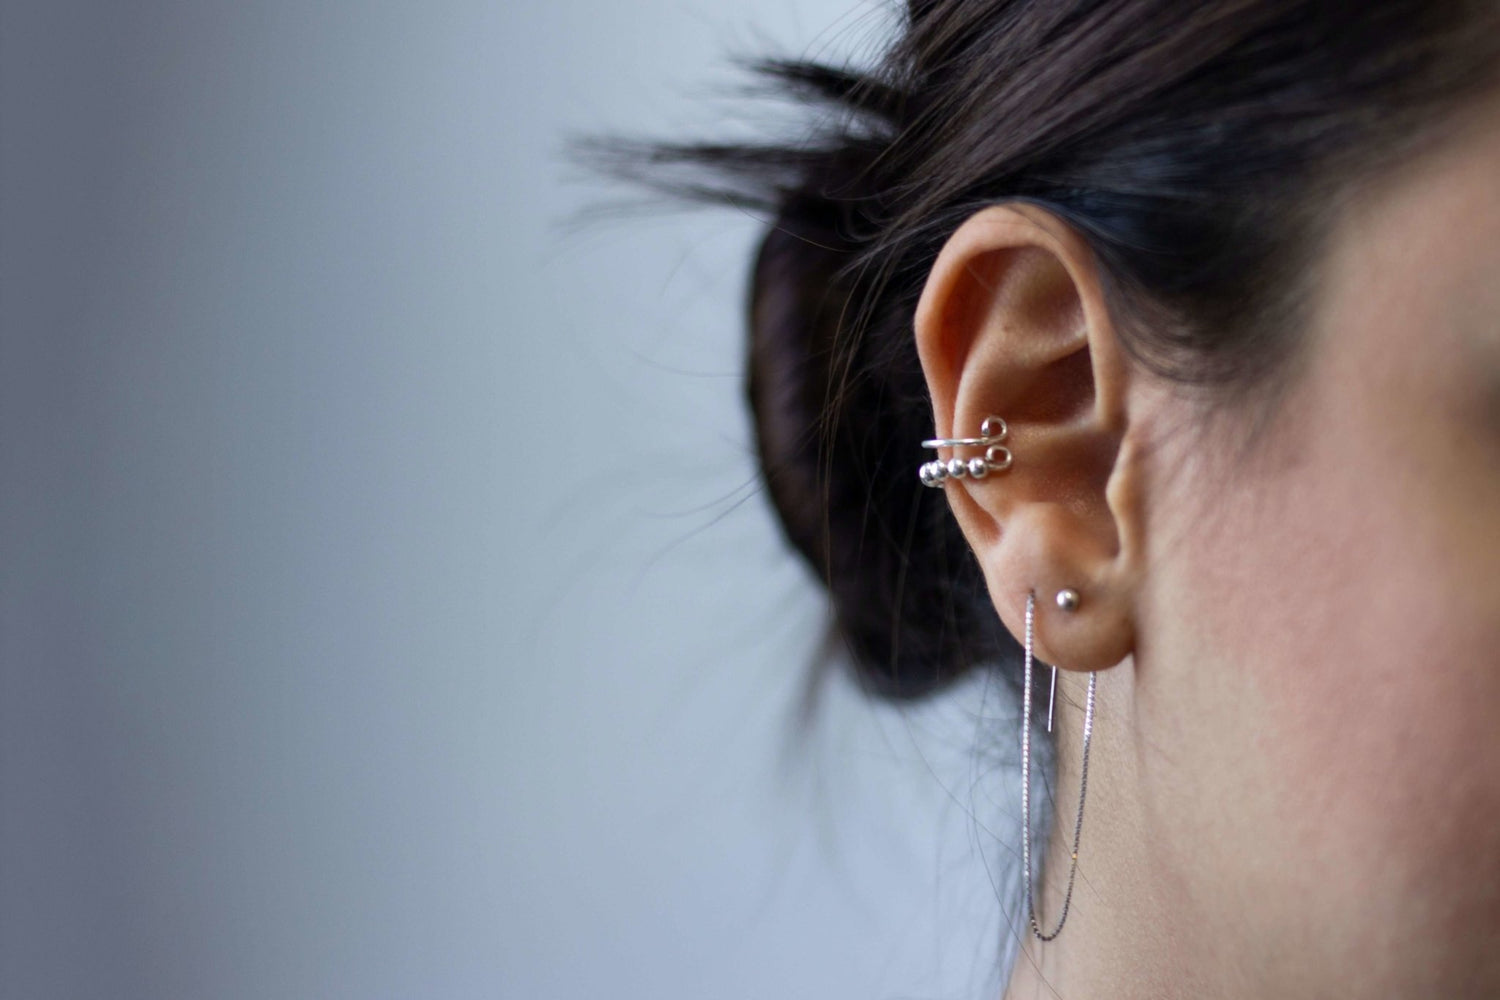 What Is A Conch Piercing? - Dr. Piercing Aftercare